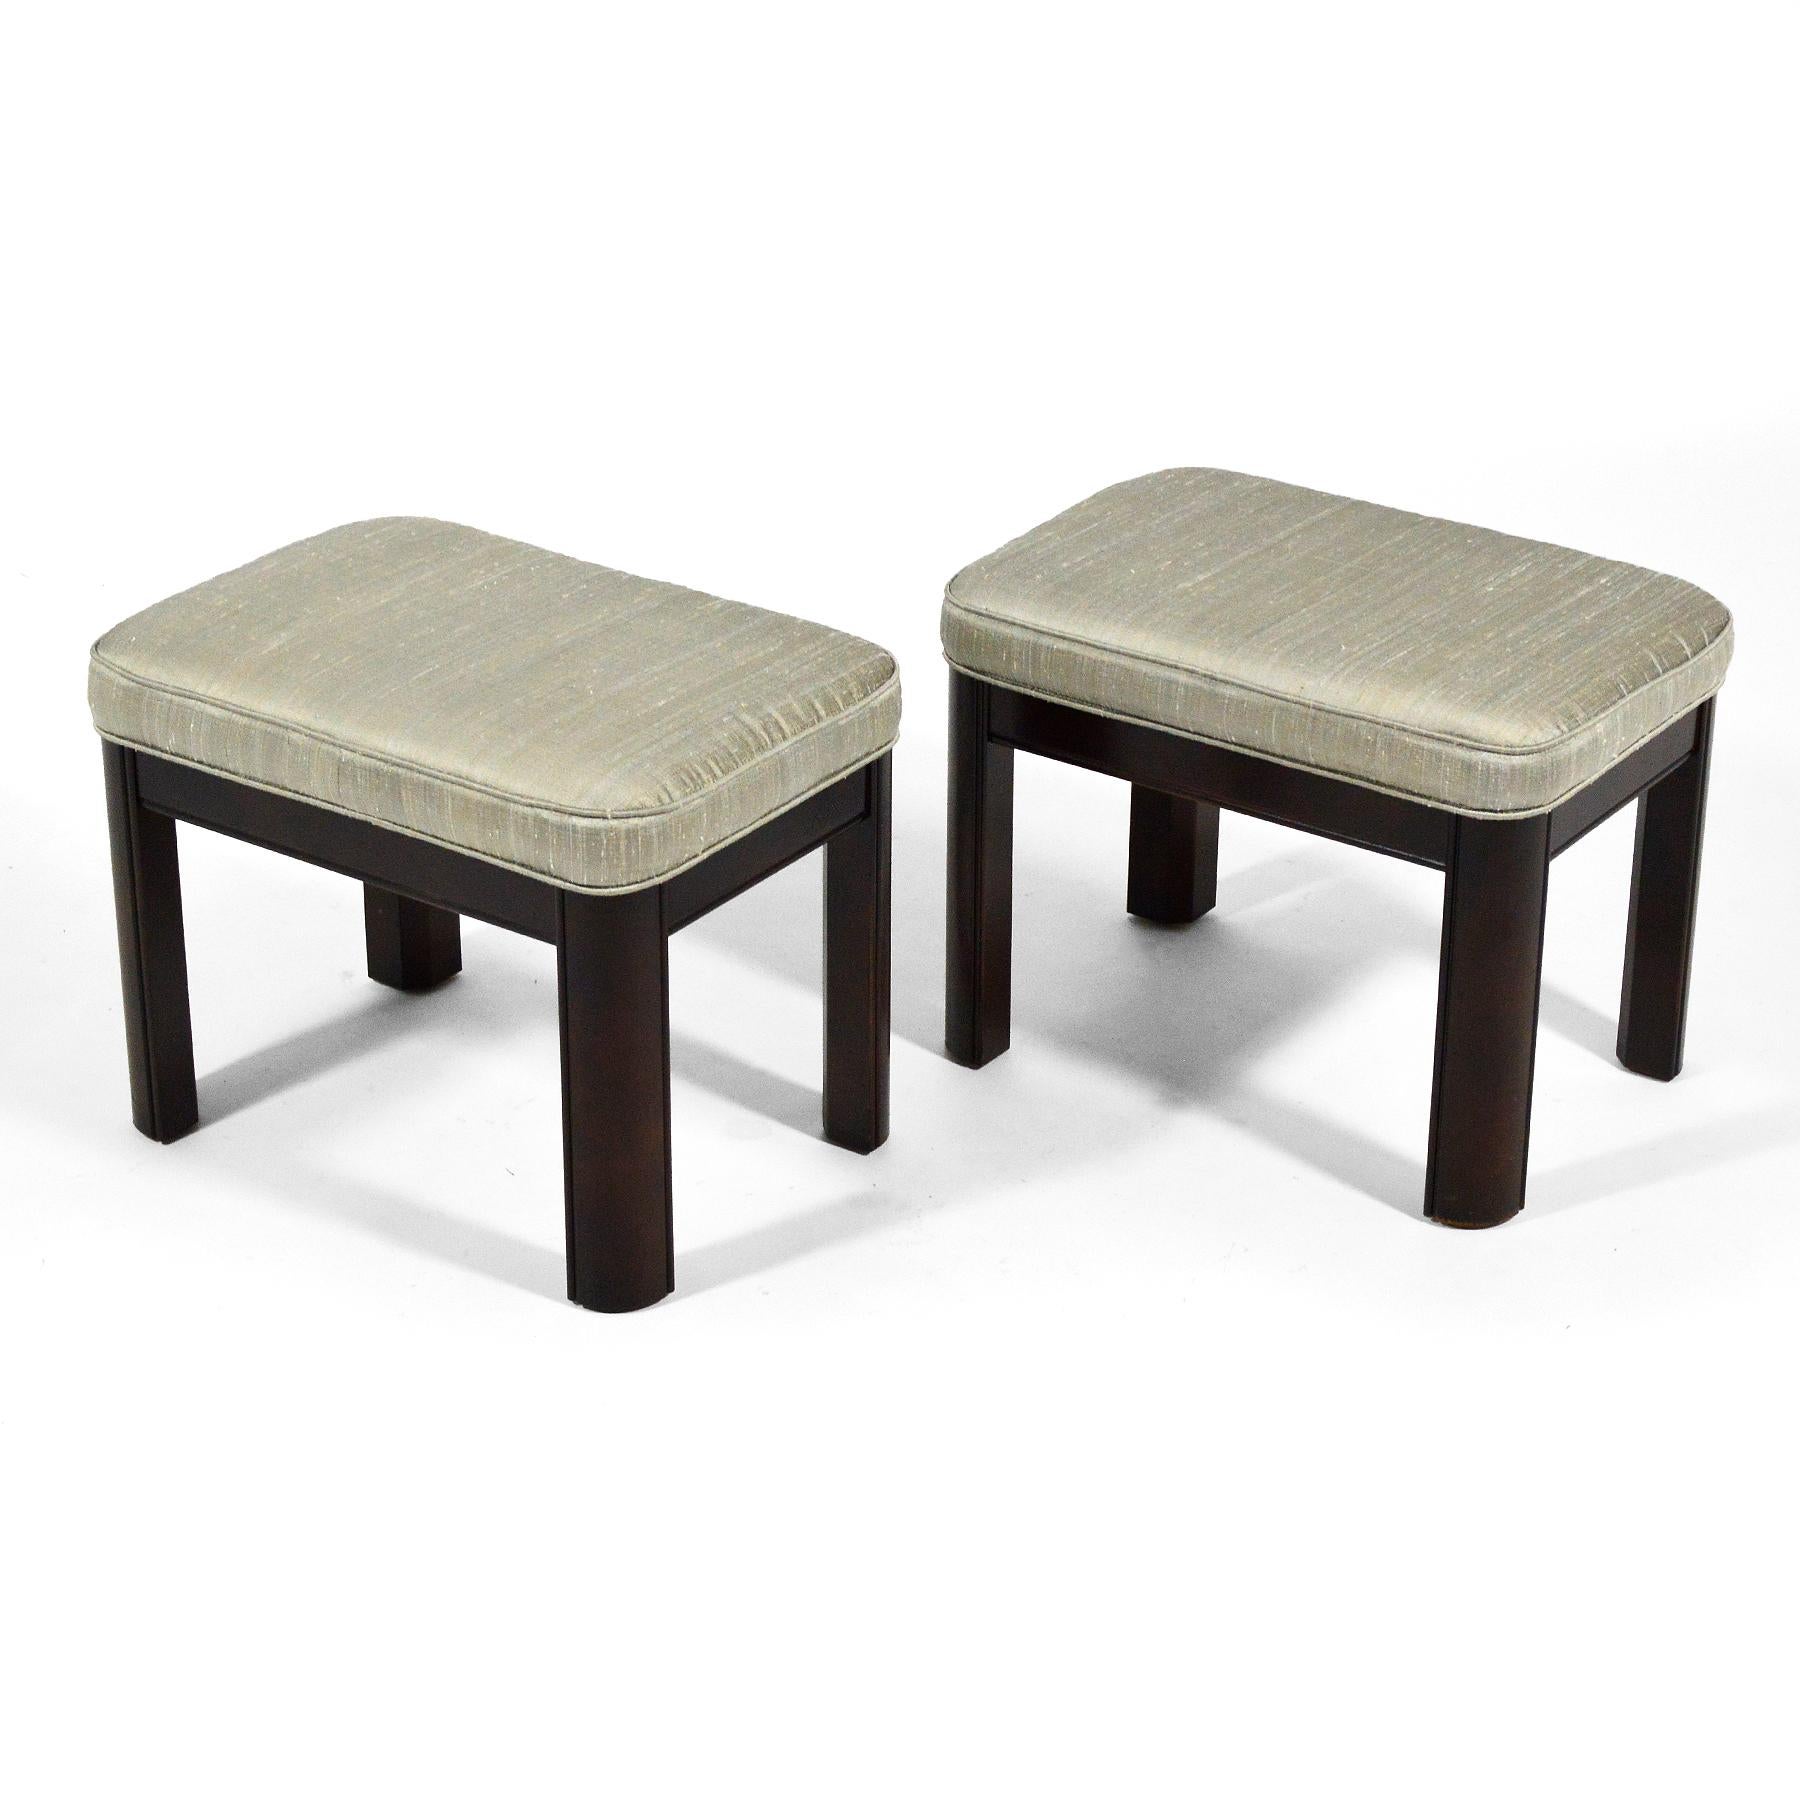 This handsome pair of stools by Gordon's Furniture have seats upholstered in silk supported by mahogany bases.